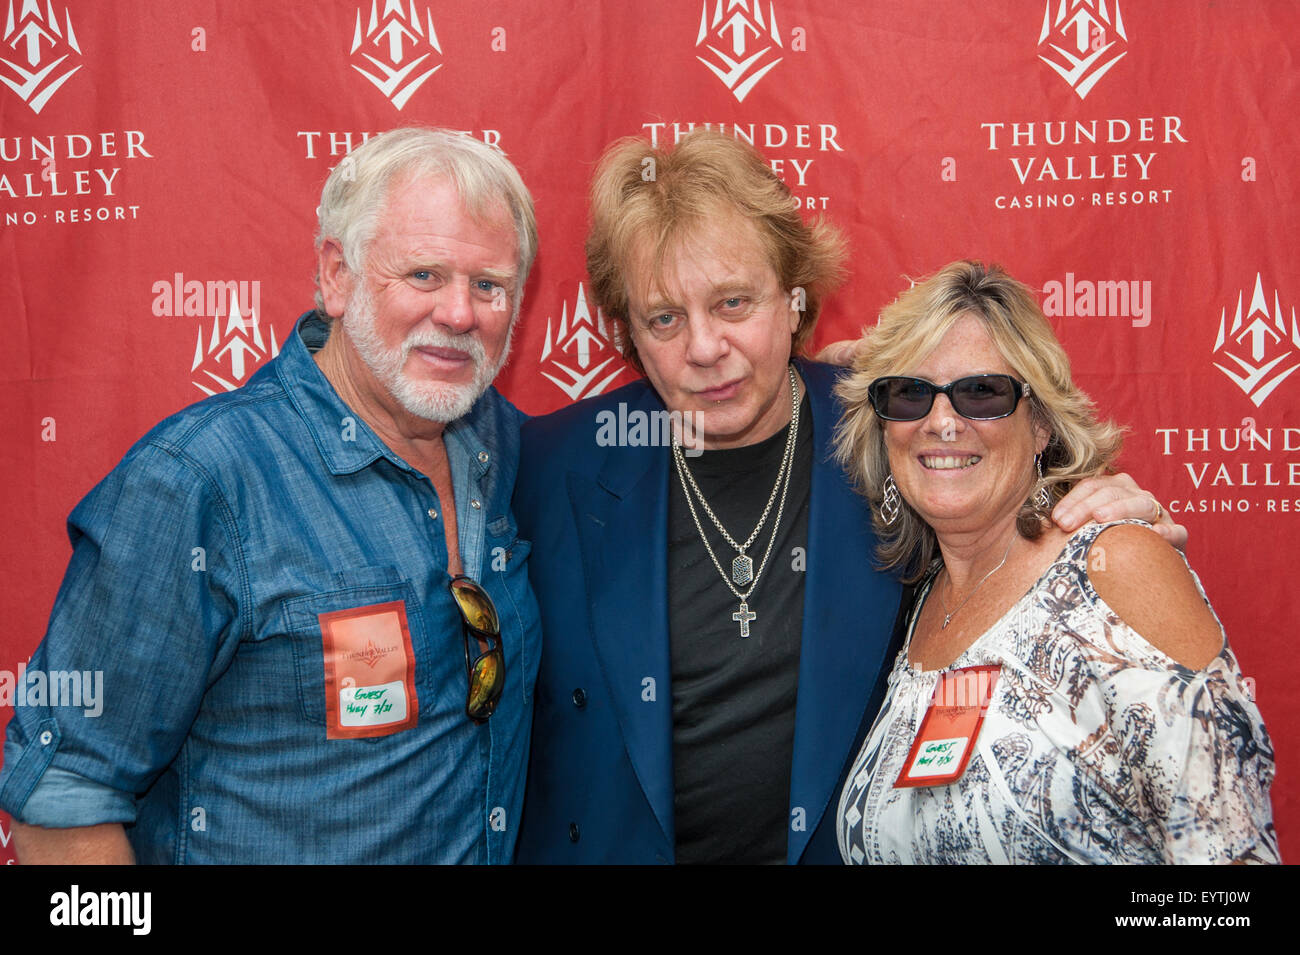 LINCOLN, CA - July 31: Eddie Money poses with Steve and Kathy Orsi at Thunder Valley Casino Resort in in Lincoln, California on Stock Photo